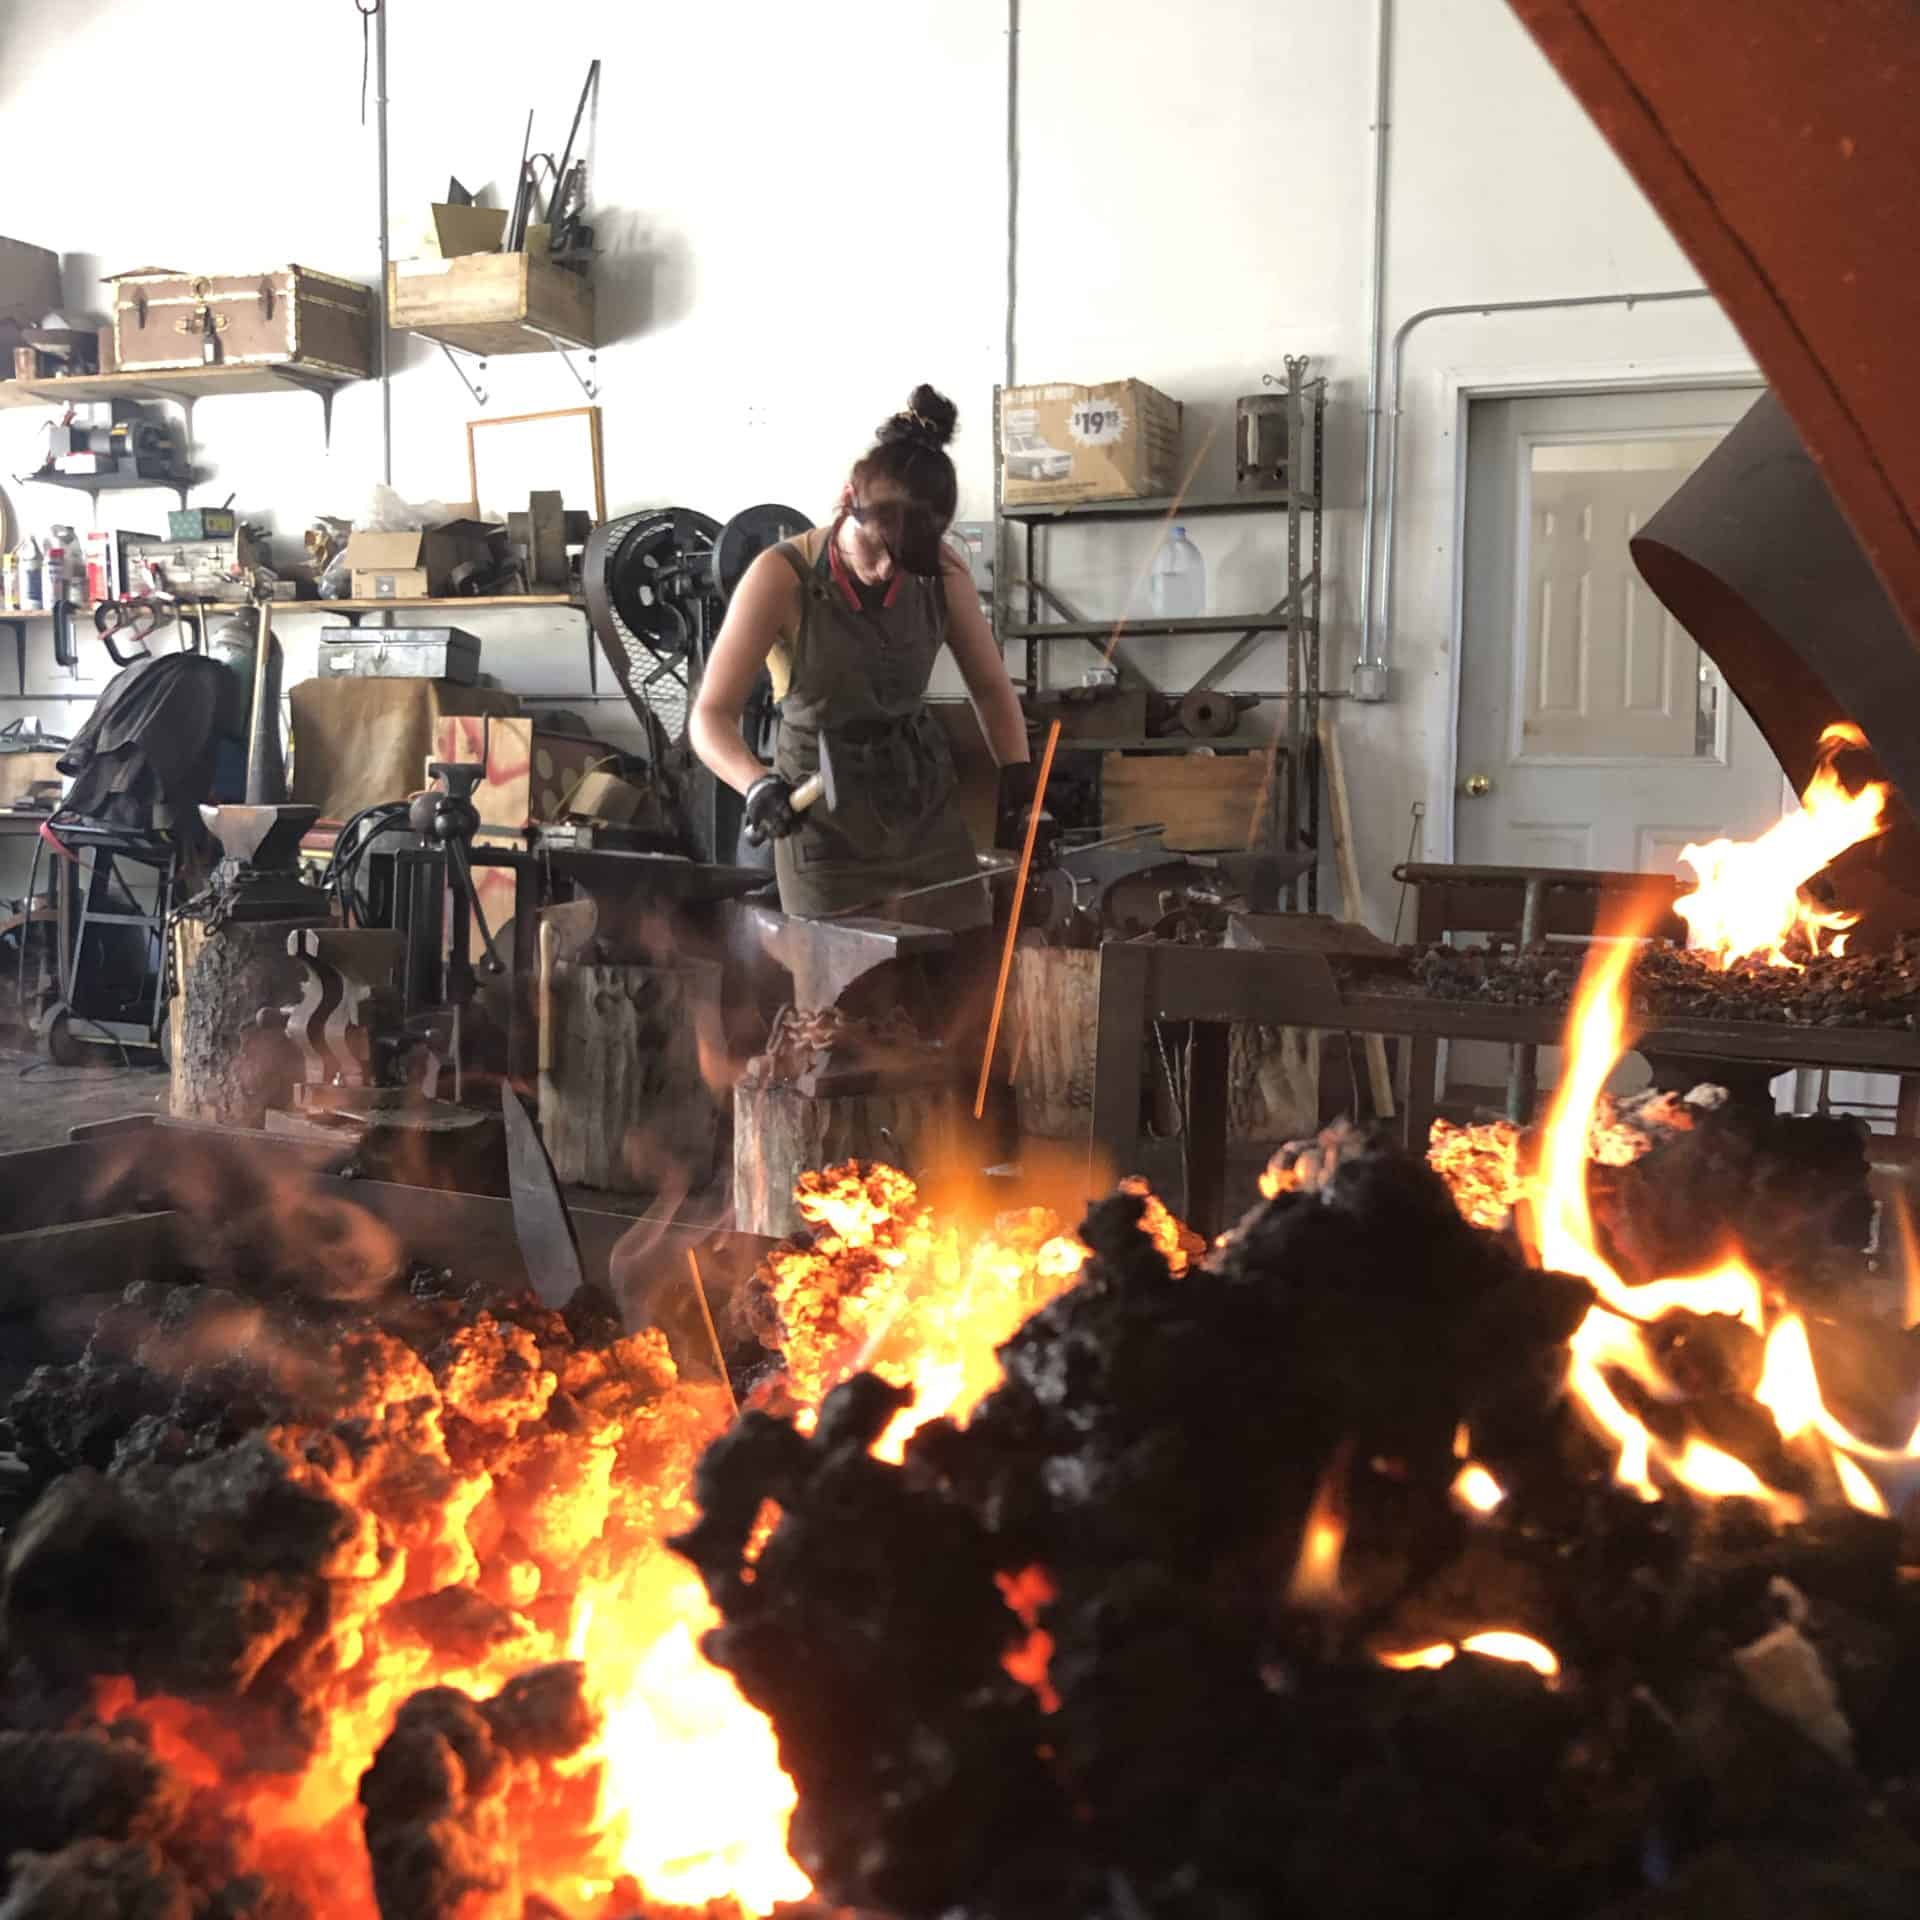 The forge glows in the annual festival of fire as a smith shapes her work on the anvil at Salem Art Works. Press photo courtesy of SAW